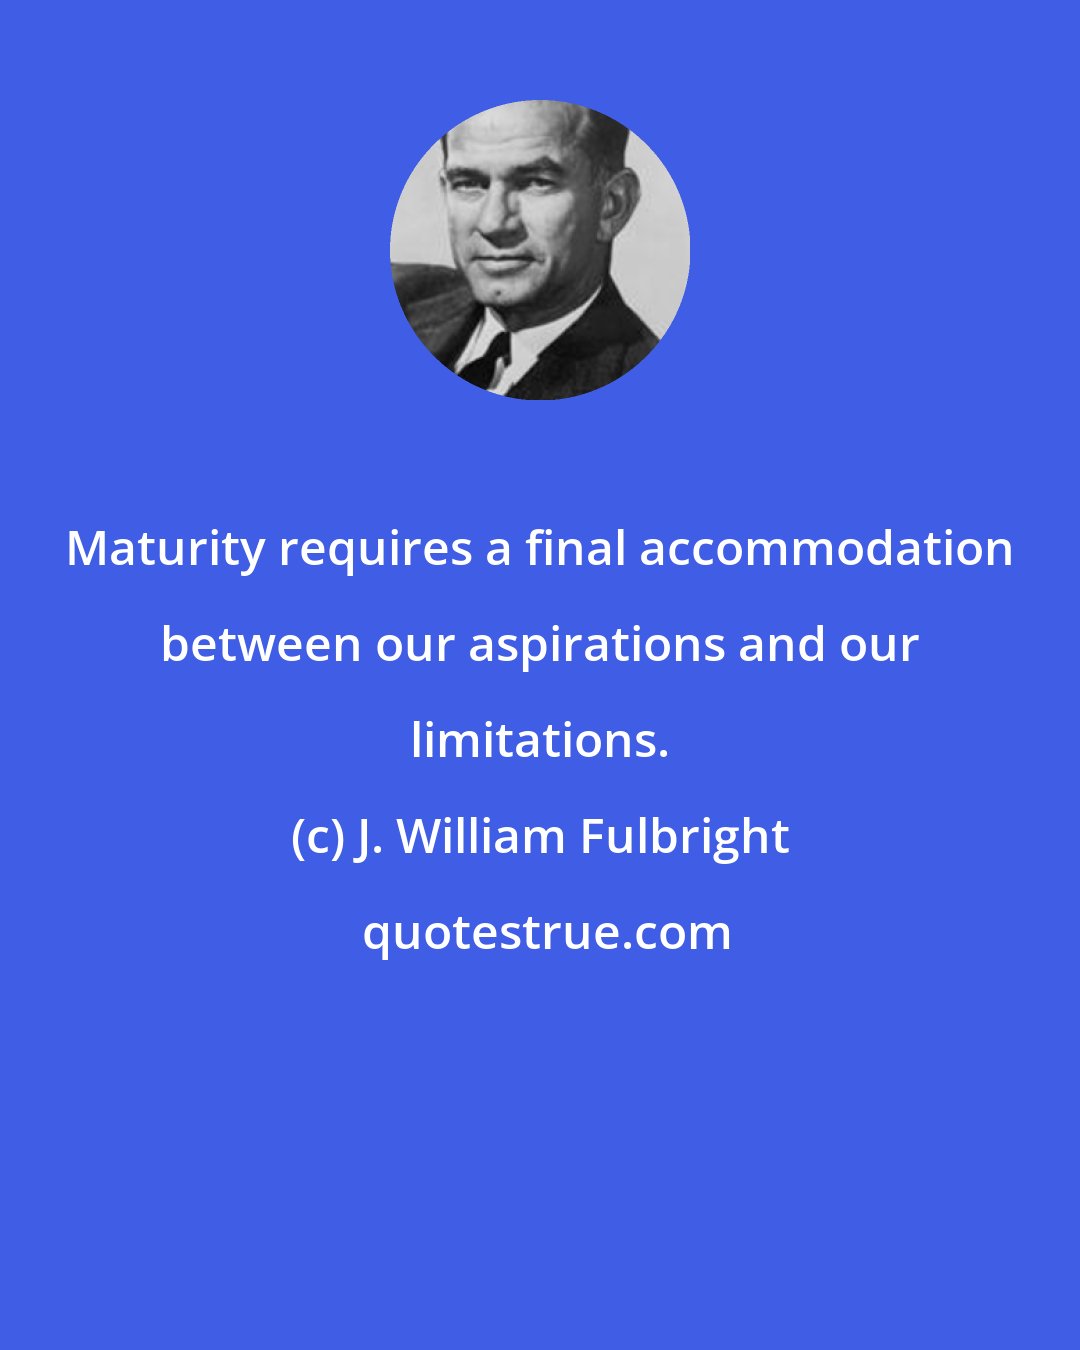 J. William Fulbright: Maturity requires a final accommodation between our aspirations and our limitations.